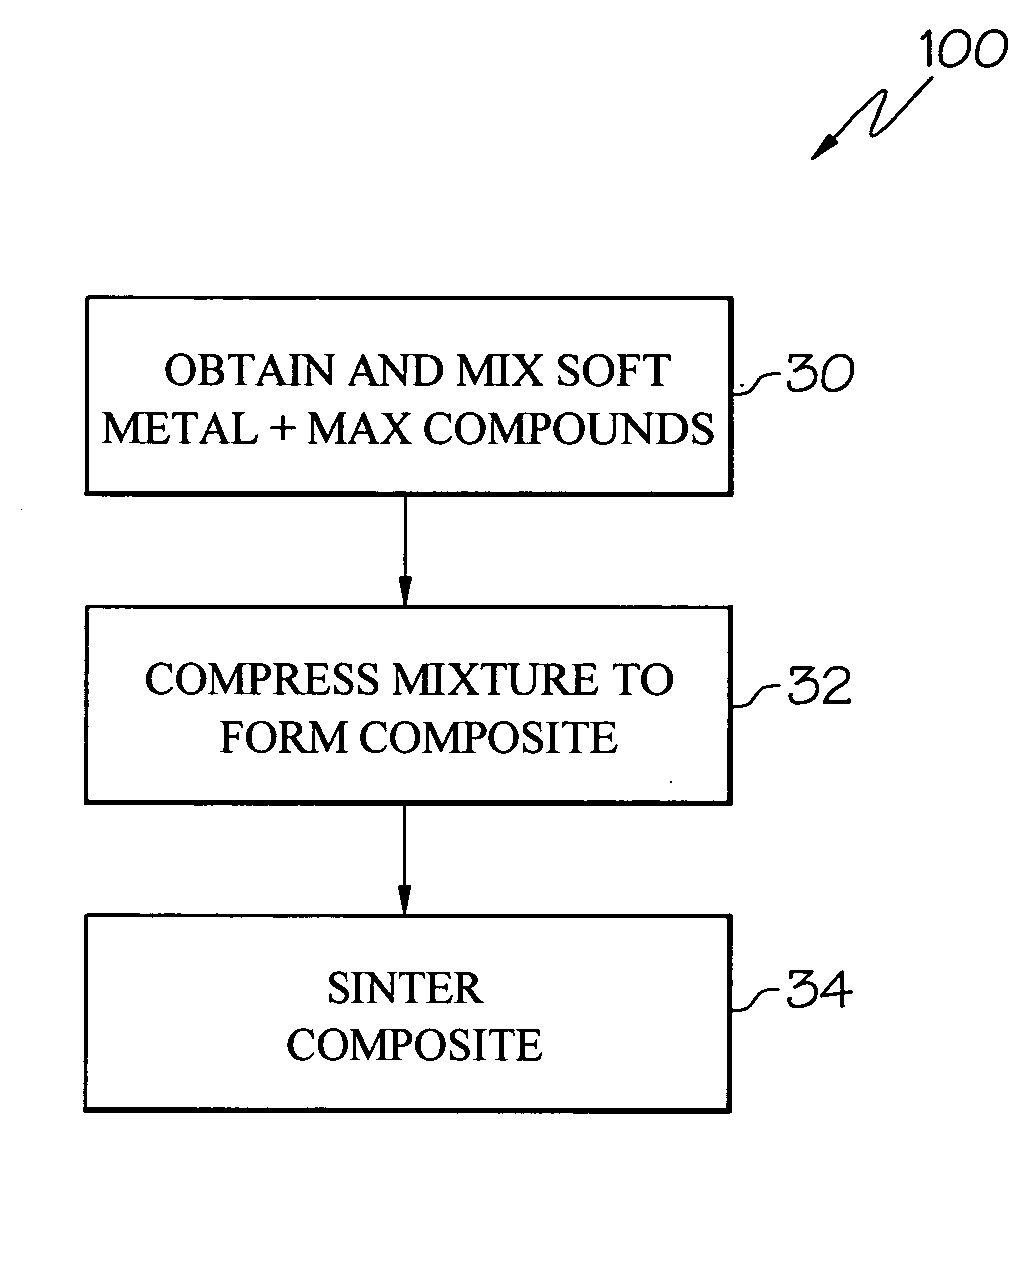 Ternary carbide and nitride composites having tribological applications and methods of making same